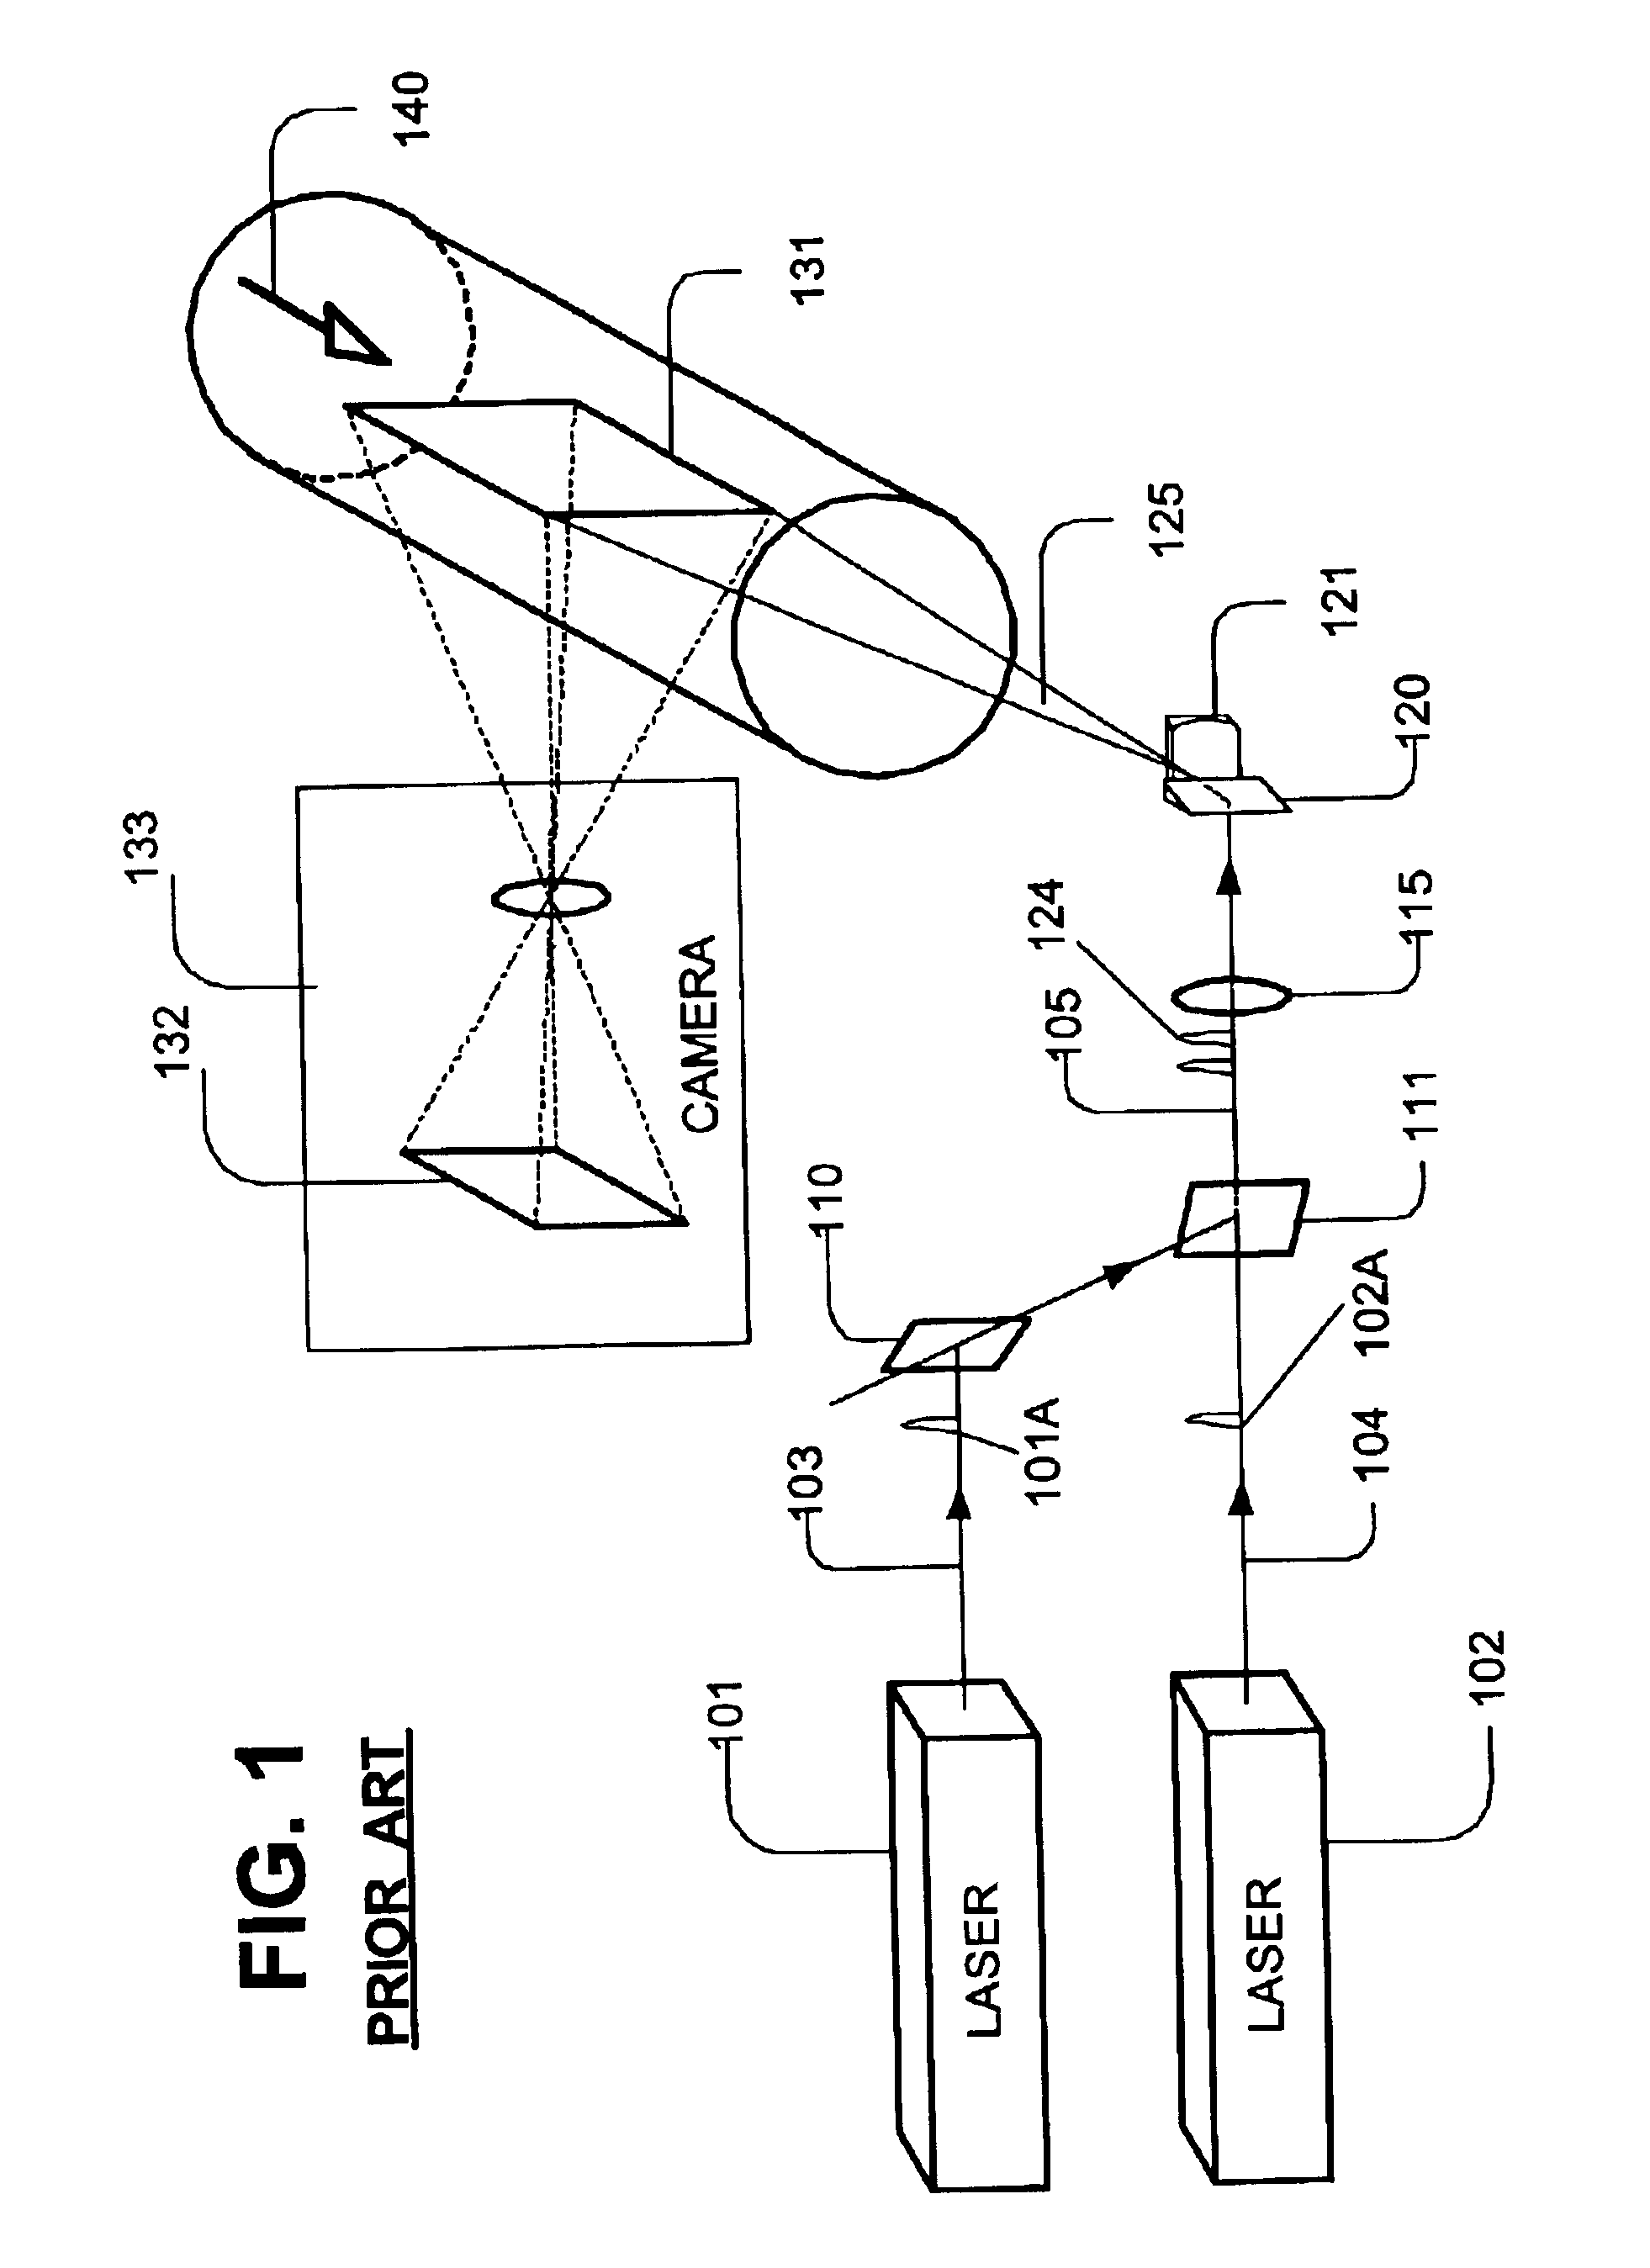 Dual head laser system with intra-cavity polarization, and particle image velocimetry system using same